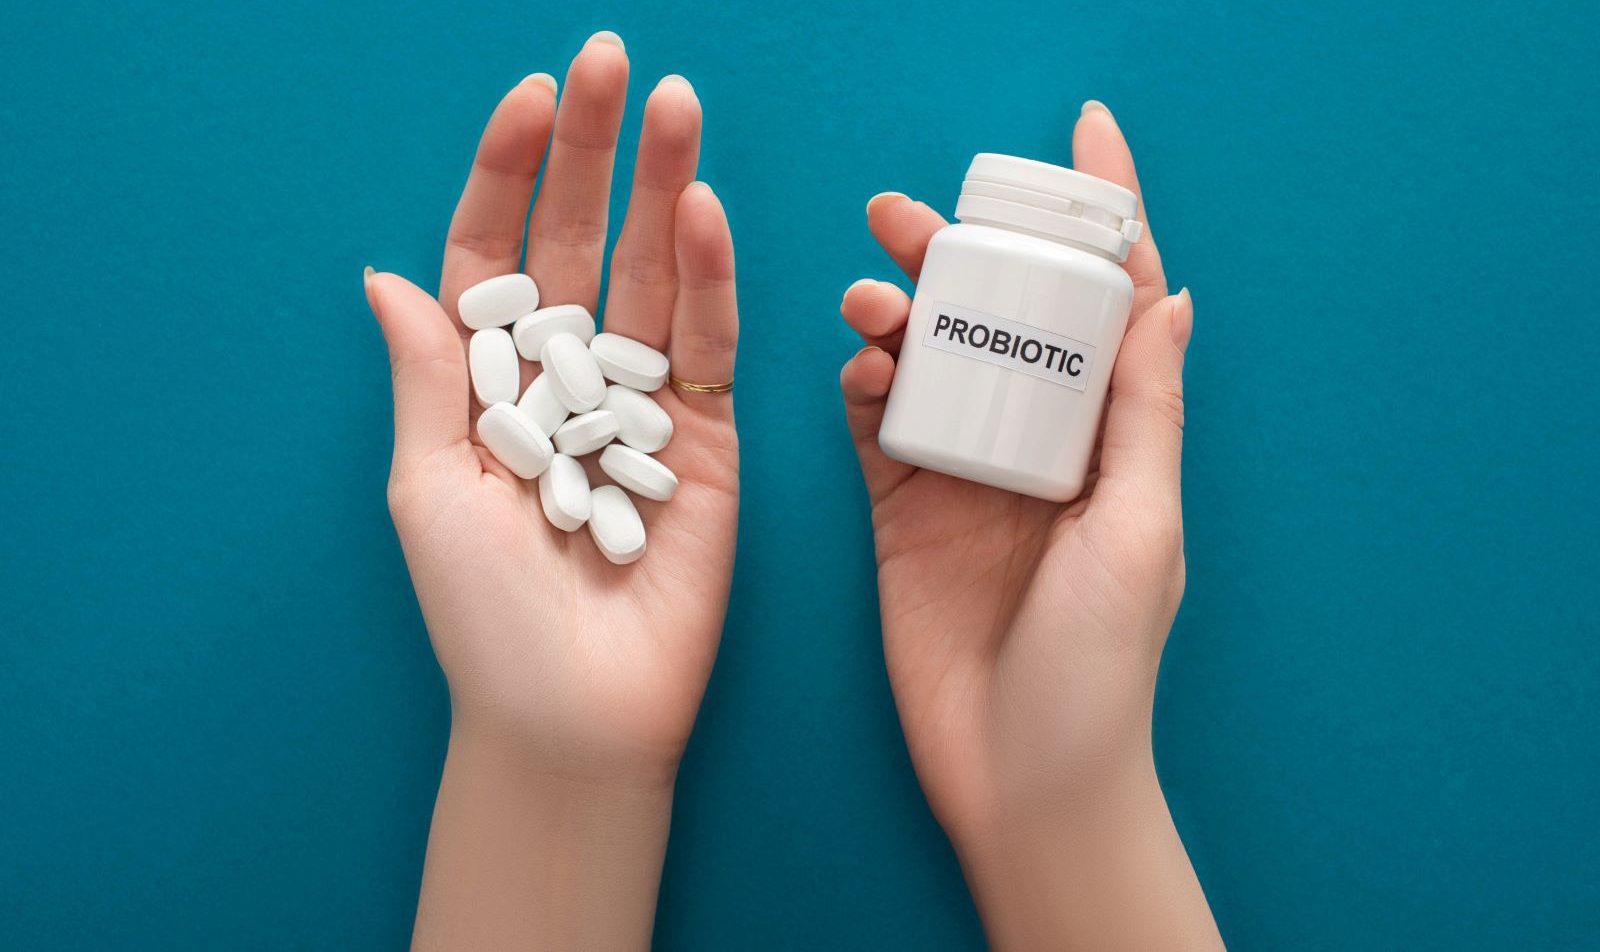 If you are an otherwise healthy person, should you be taking probiotics? An expert explains when probiotics might be right for you.